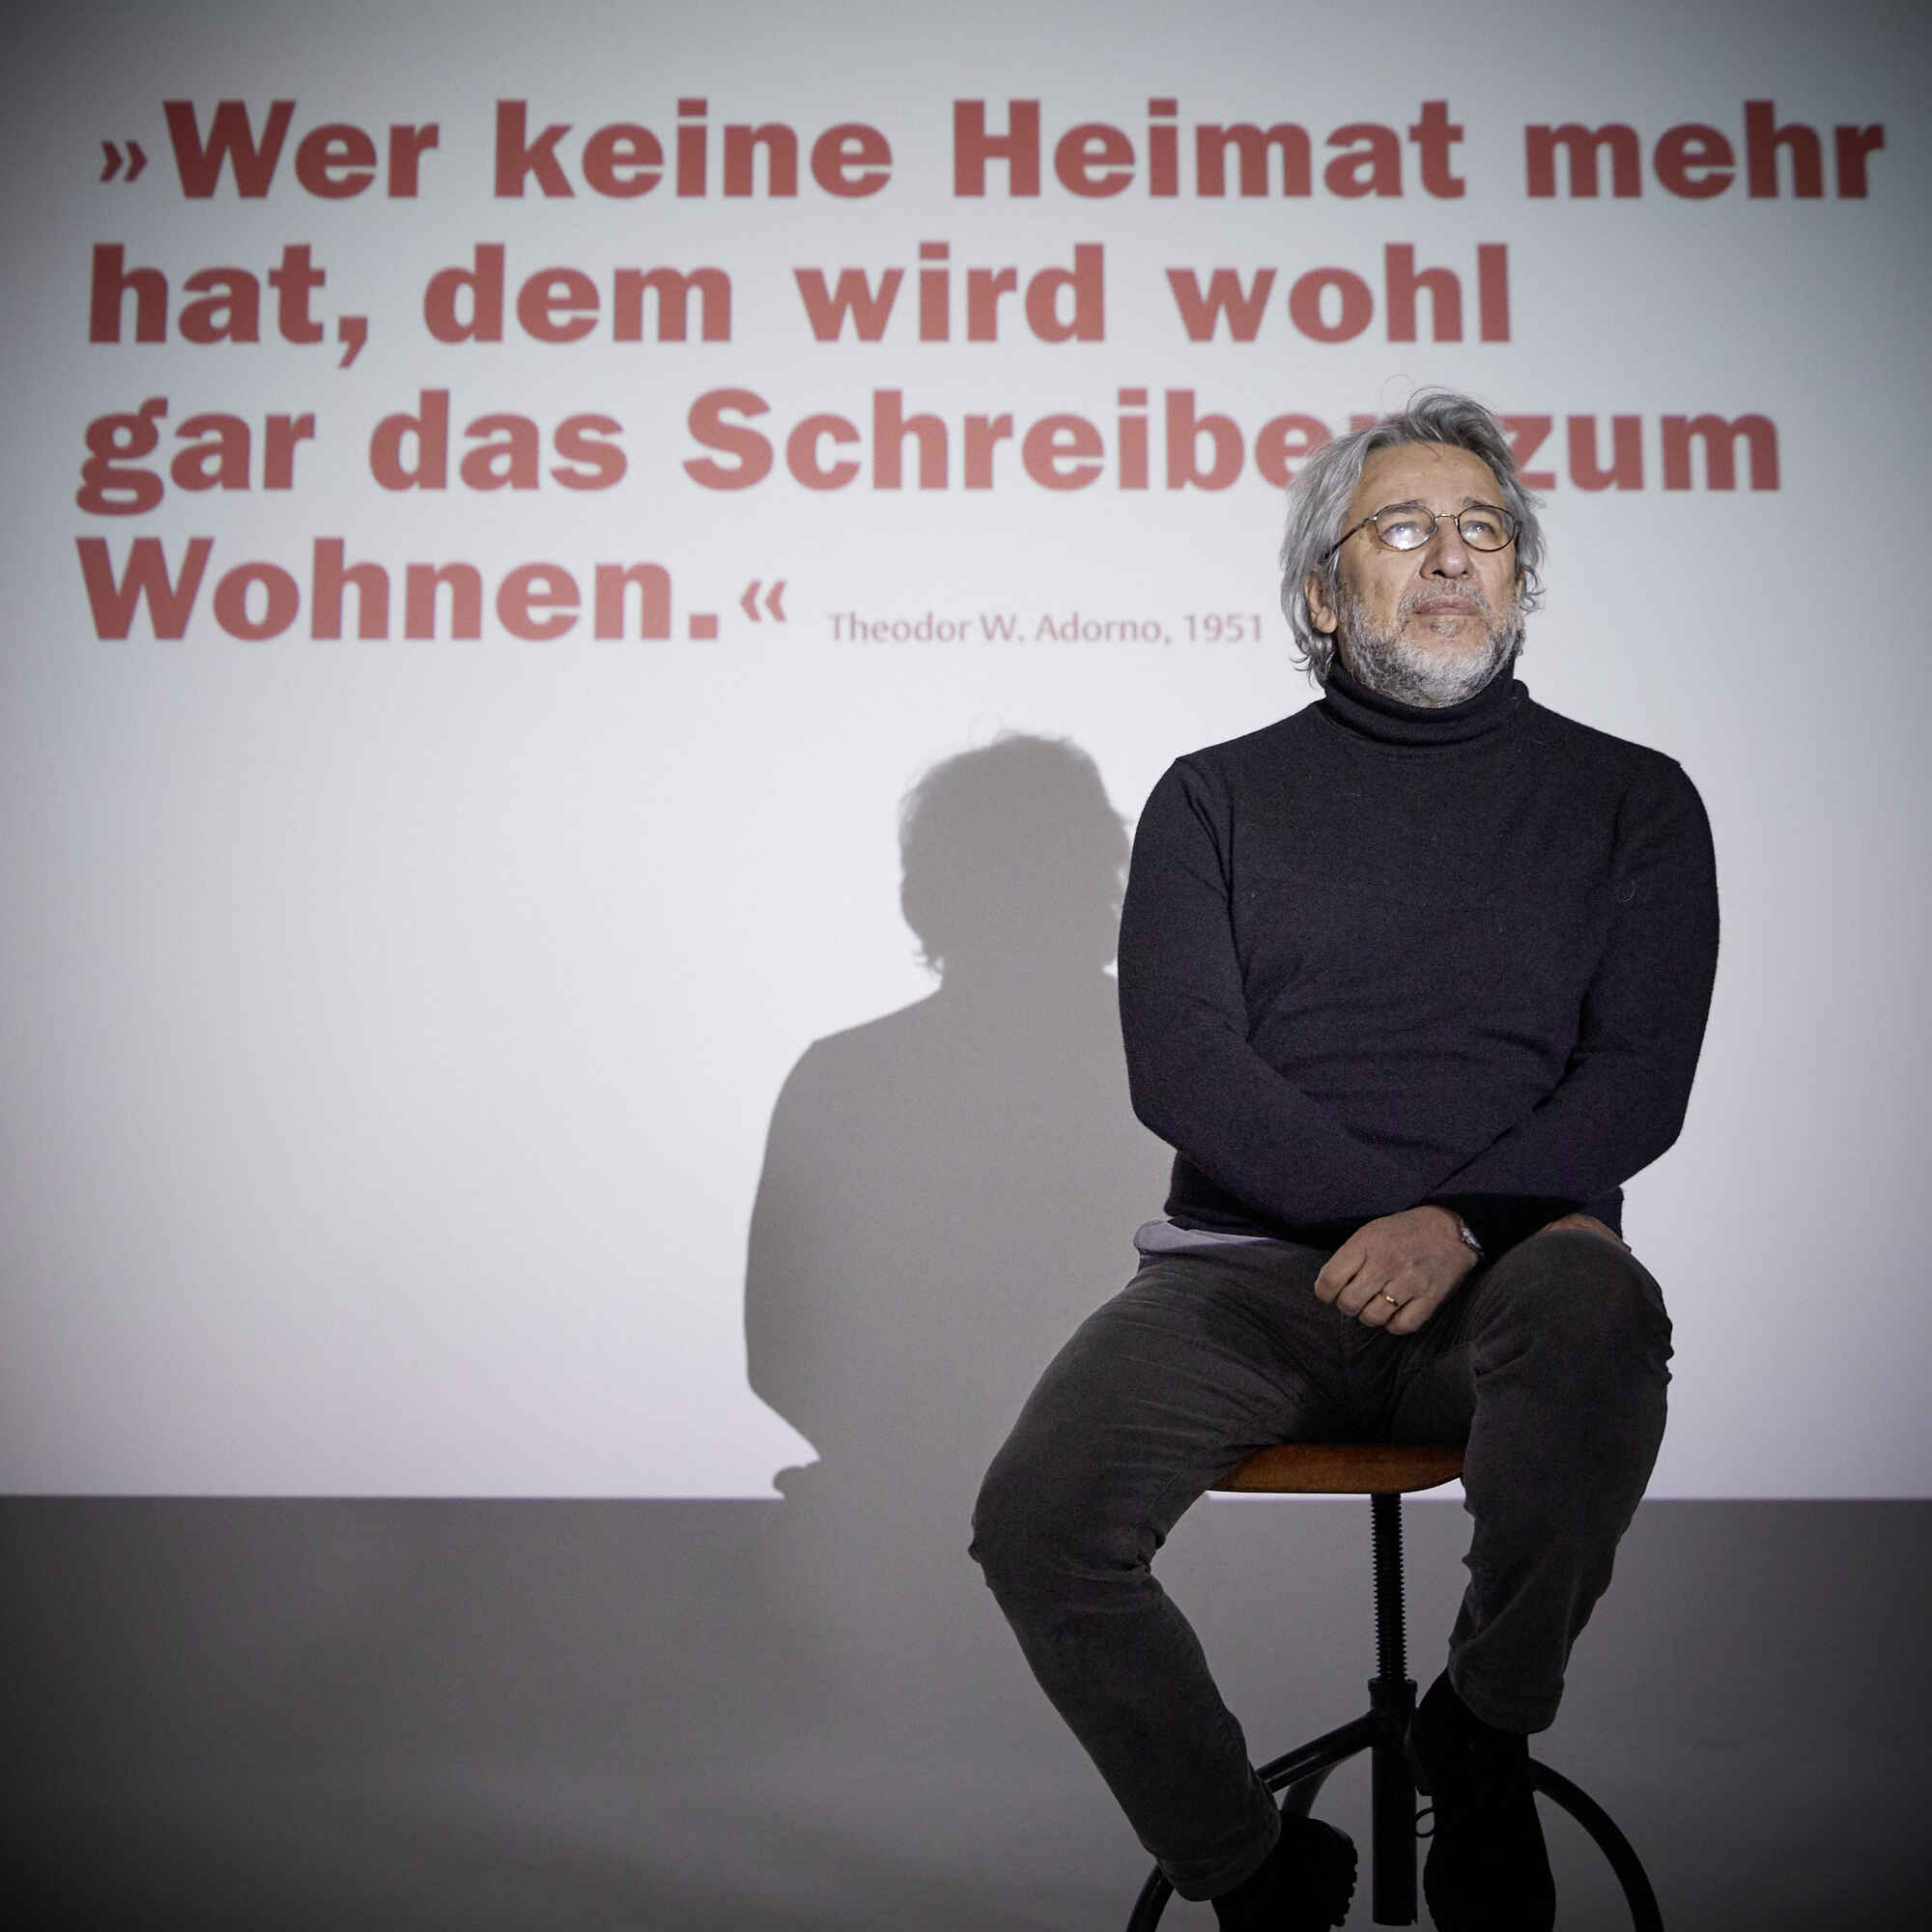 Can Dündar has been living in exile in Germany since 2016.